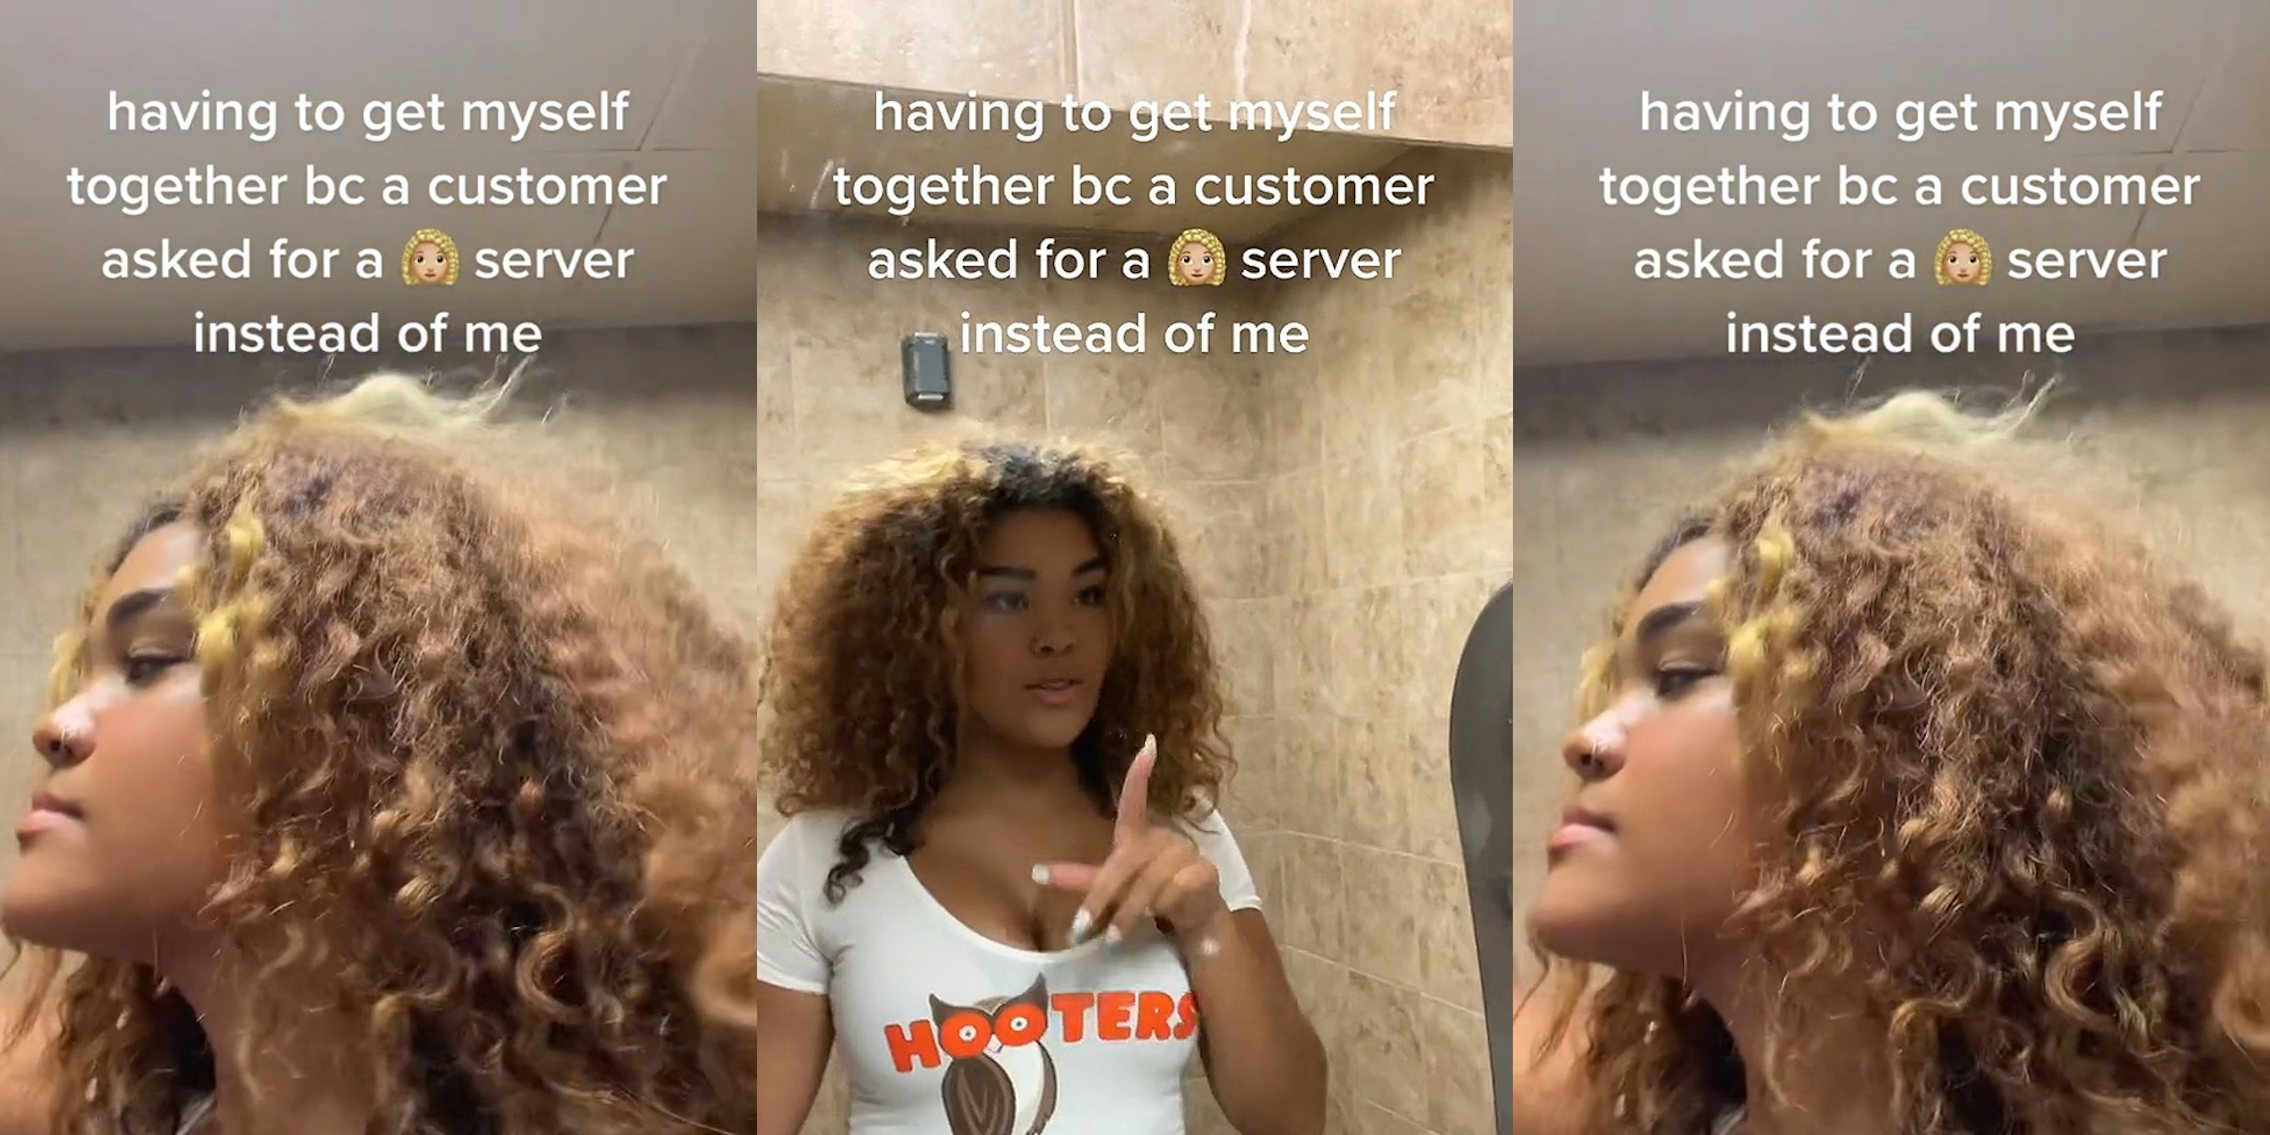 Hooters worker in bathroom touching hair caption 'having to get myself together bc a customer asked for a (blonde white woman emoji) server instead of me' (l) Hooters worker in bathroom speaking to herself in mirror caption 'having to get myself together bc a customer asked for a (blonde white woman emoji) server instead of me' (c) Hooters worker in bathroom touching hair caption 'having to get myself together bc a customer asked for a (blonde white woman emoji) server instead of me' (r)